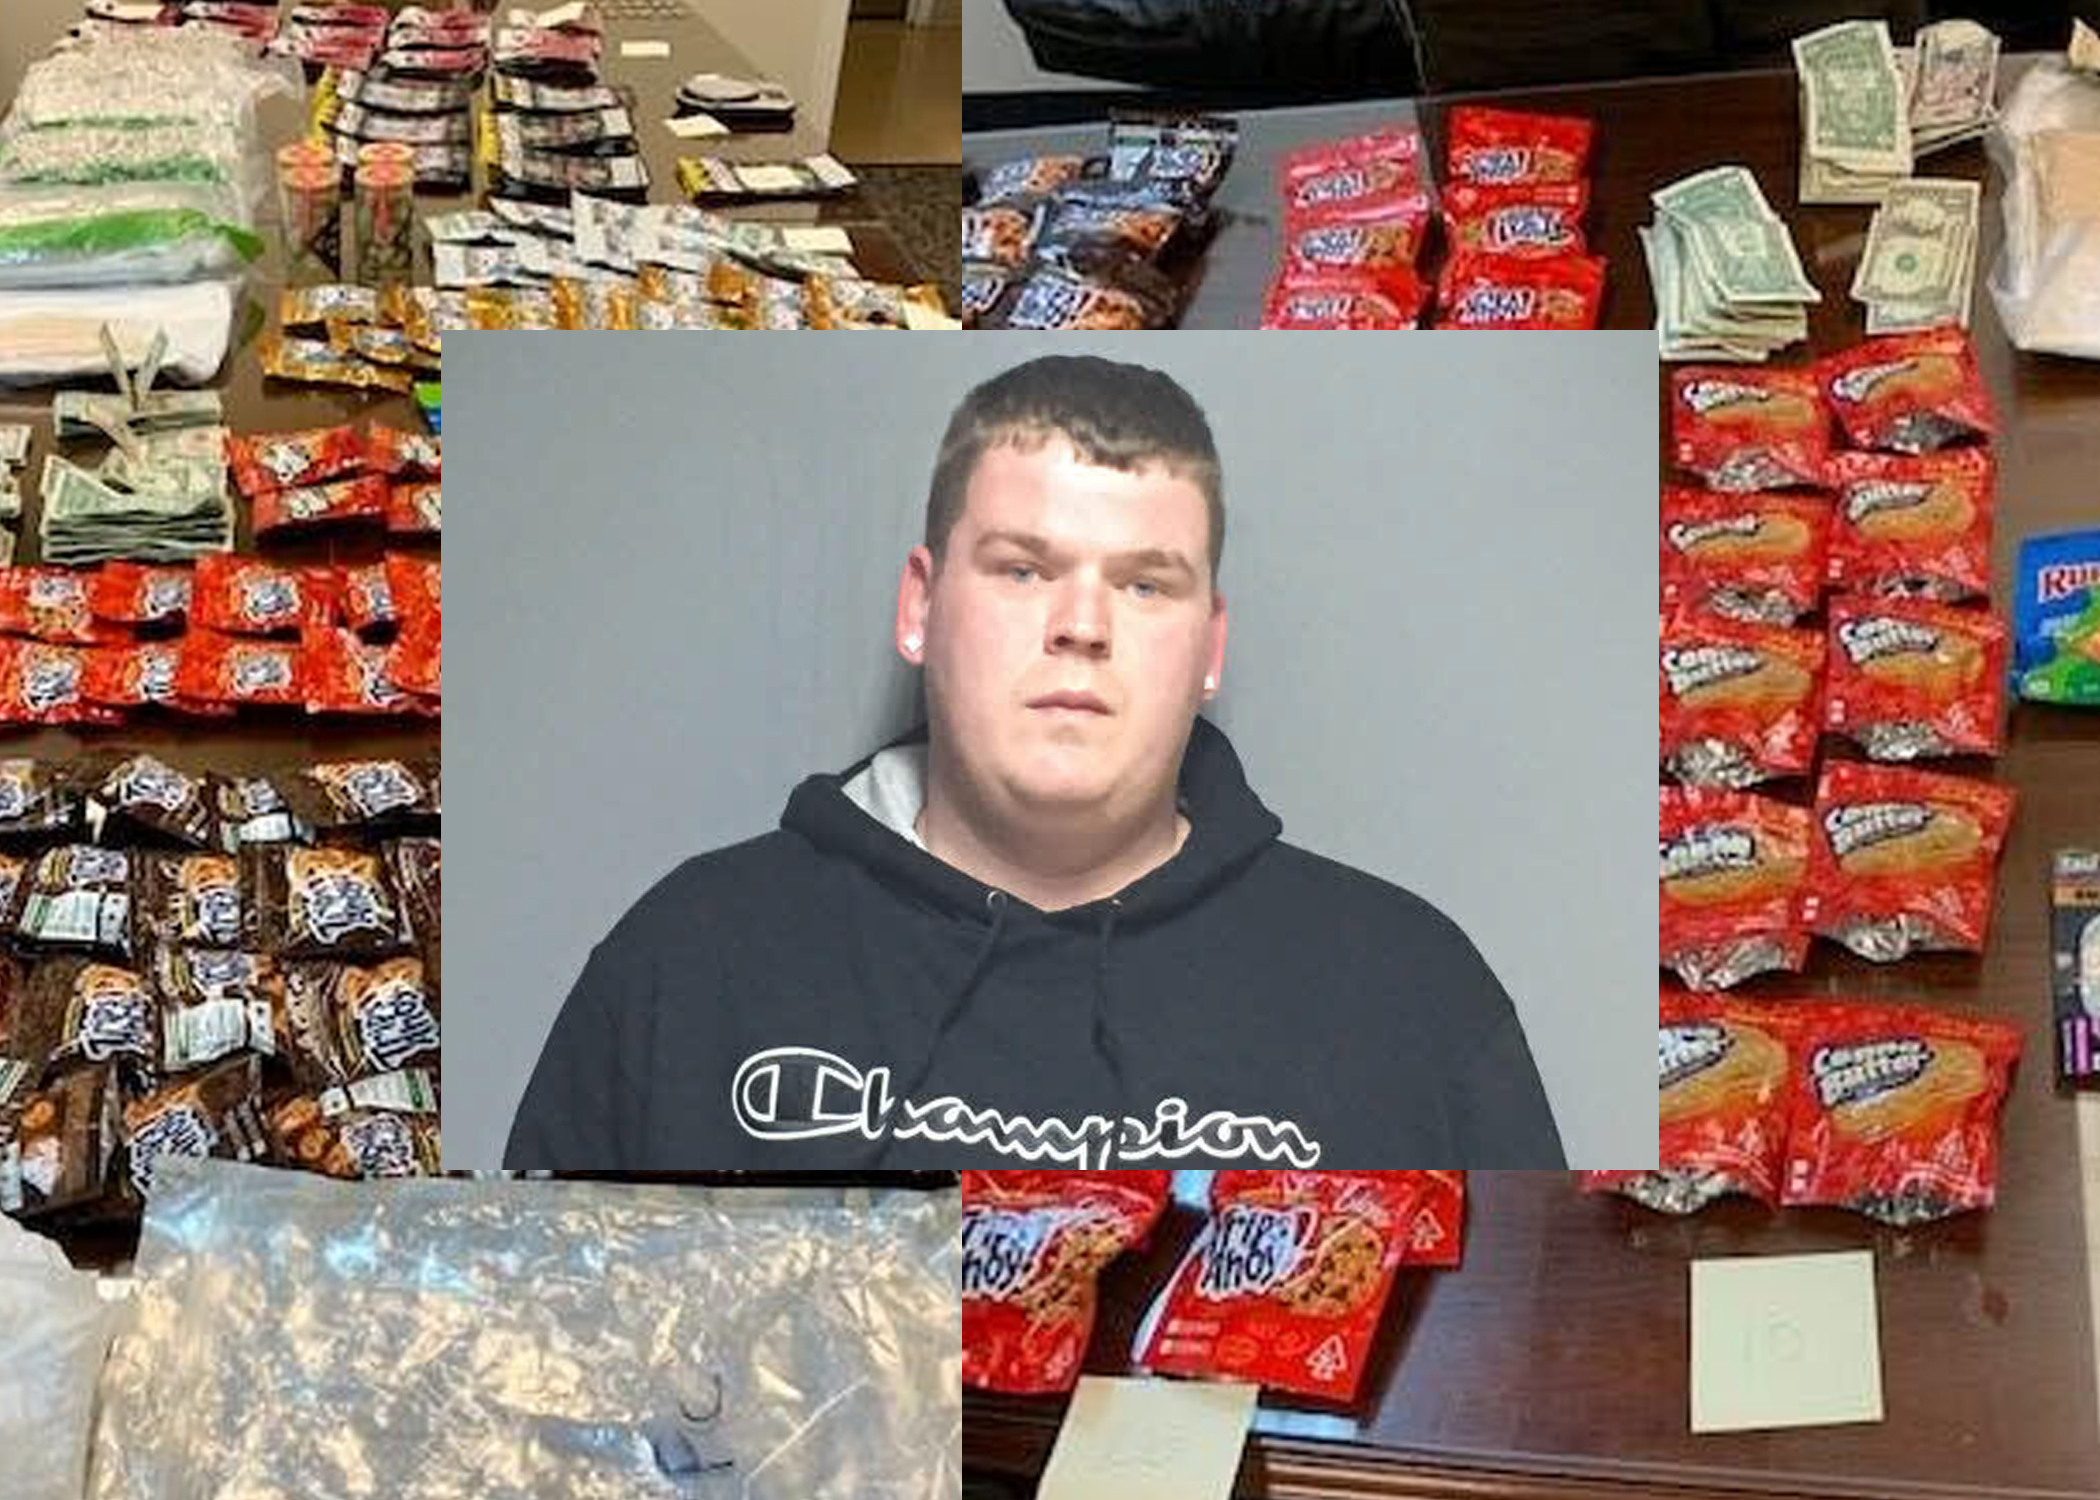 St. Clair County Sheriff's Office arrests man on suspicion of drug trafficking